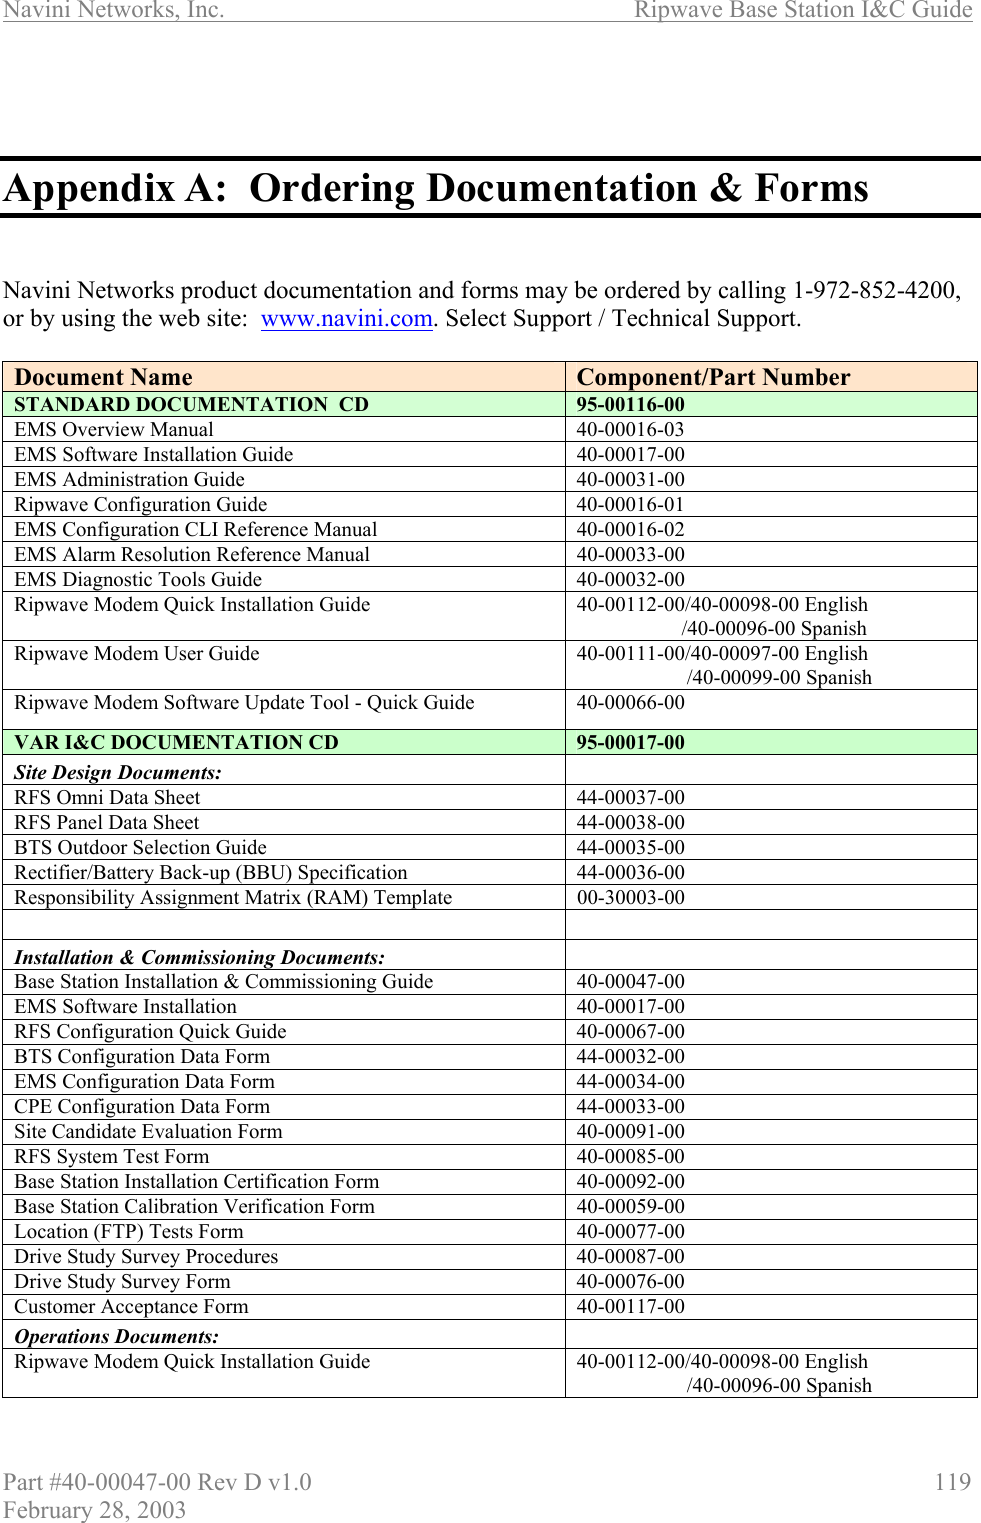 Navini Networks, Inc.                          Ripwave Base Station I&amp;C Guide Part #40-00047-00 Rev D v1.0                     119 February 28, 2003    Appendix A:  Ordering Documentation &amp; Forms   Navini Networks product documentation and forms may be ordered by calling 1-972-852-4200, or by using the web site:  www.navini.com. Select Support / Technical Support.  Document Name  Component/Part Number STANDARD DOCUMENTATION  CD  95-00116-00 EMS Overview Manual  40-00016-03 EMS Software Installation Guide  40-00017-00 EMS Administration Guide  40-00031-00 Ripwave Configuration Guide  40-00016-01 EMS Configuration CLI Reference Manual  40-00016-02 EMS Alarm Resolution Reference Manual  40-00033-00 EMS Diagnostic Tools Guide  40-00032-00 Ripwave Modem Quick Installation Guide  40-00112-00/40-00098-00 English                     /40-00096-00 Spanish Ripwave Modem User Guide  40-00111-00/40-00097-00 English                      /40-00099-00 Spanish Ripwave Modem Software Update Tool - Quick Guide  40-00066-00 VAR I&amp;C DOCUMENTATION CD  95-00017-00 Site Design Documents:   RFS Omni Data Sheet  44-00037-00 RFS Panel Data Sheet  44-00038-00 BTS Outdoor Selection Guide  44-00035-00 Rectifier/Battery Back-up (BBU) Specification  44-00036-00 Responsibility Assignment Matrix (RAM) Template  00-30003-00   Installation &amp; Commissioning Documents:   Base Station Installation &amp; Commissioning Guide  40-00047-00 EMS Software Installation  40-00017-00 RFS Configuration Quick Guide  40-00067-00 BTS Configuration Data Form  44-00032-00 EMS Configuration Data Form  44-00034-00 CPE Configuration Data Form  44-00033-00 Site Candidate Evaluation Form  40-00091-00 RFS System Test Form  40-00085-00 Base Station Installation Certification Form  40-00092-00 Base Station Calibration Verification Form  40-00059-00 Location (FTP) Tests Form  40-00077-00 Drive Study Survey Procedures  40-00087-00 Drive Study Survey Form  40-00076-00 Customer Acceptance Form  40-00117-00 Operations Documents:   Ripwave Modem Quick Installation Guide  40-00112-00/40-00098-00 English                      /40-00096-00 Spanish 